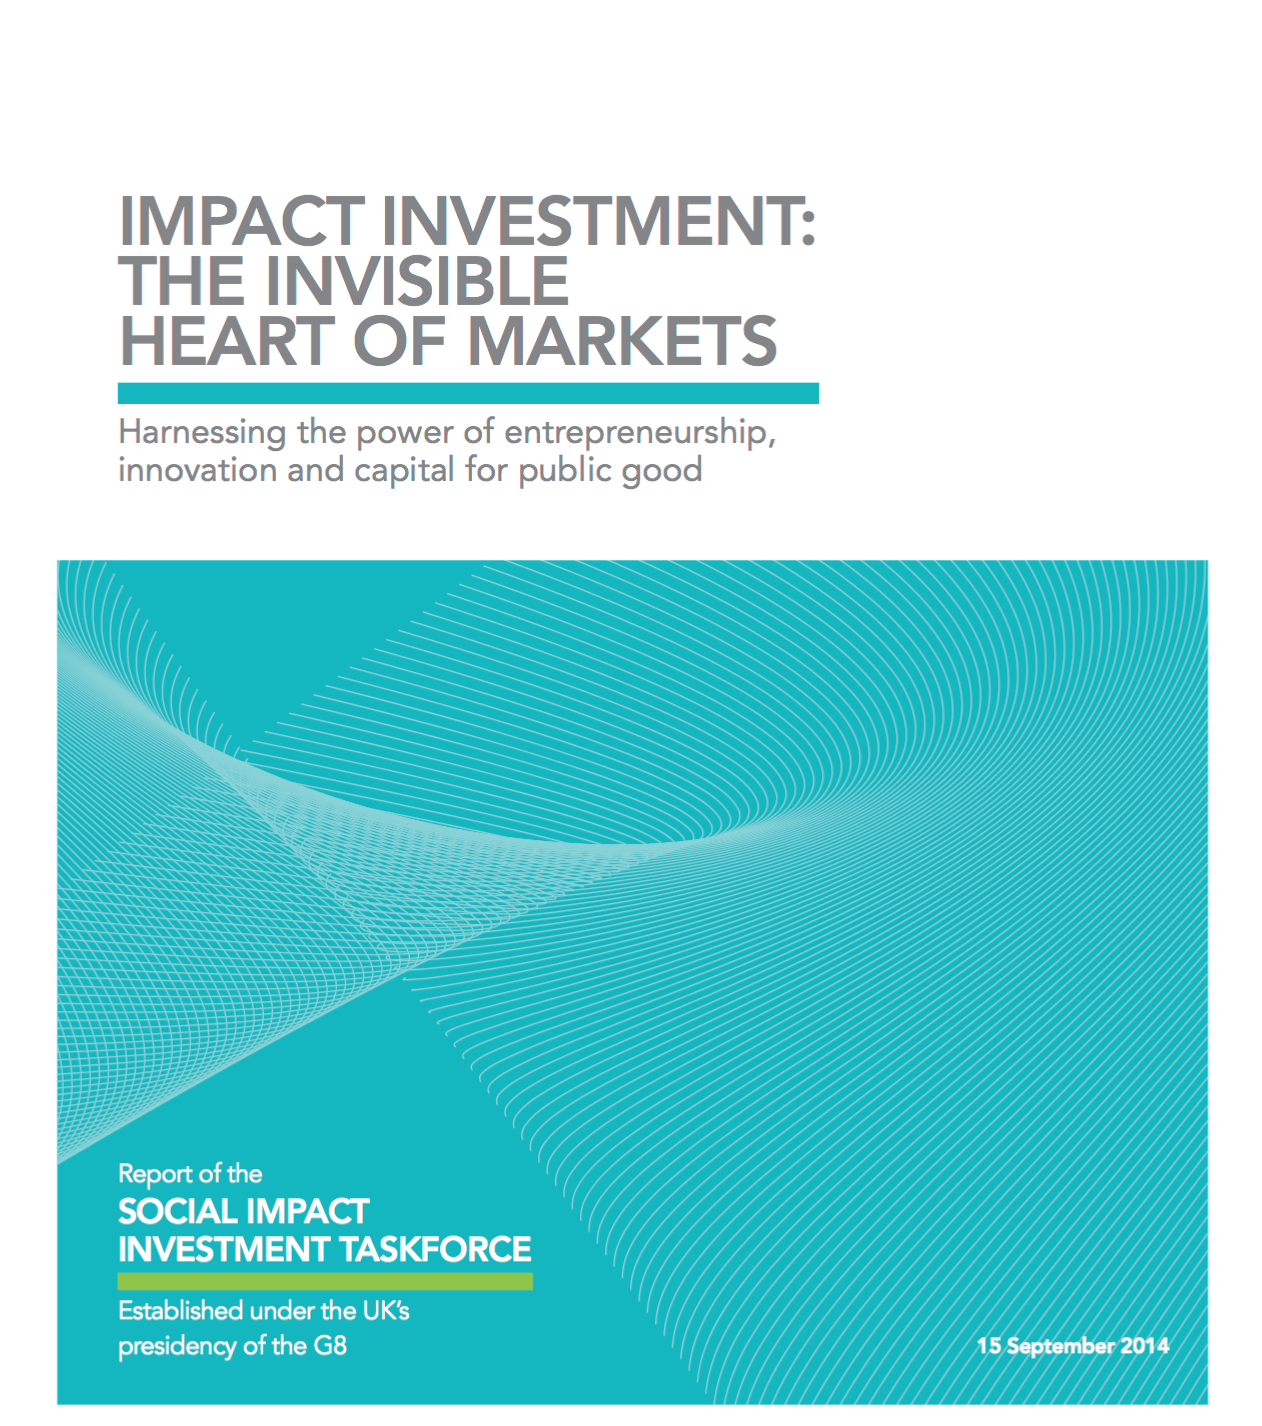 The Invisible Heart of Markets